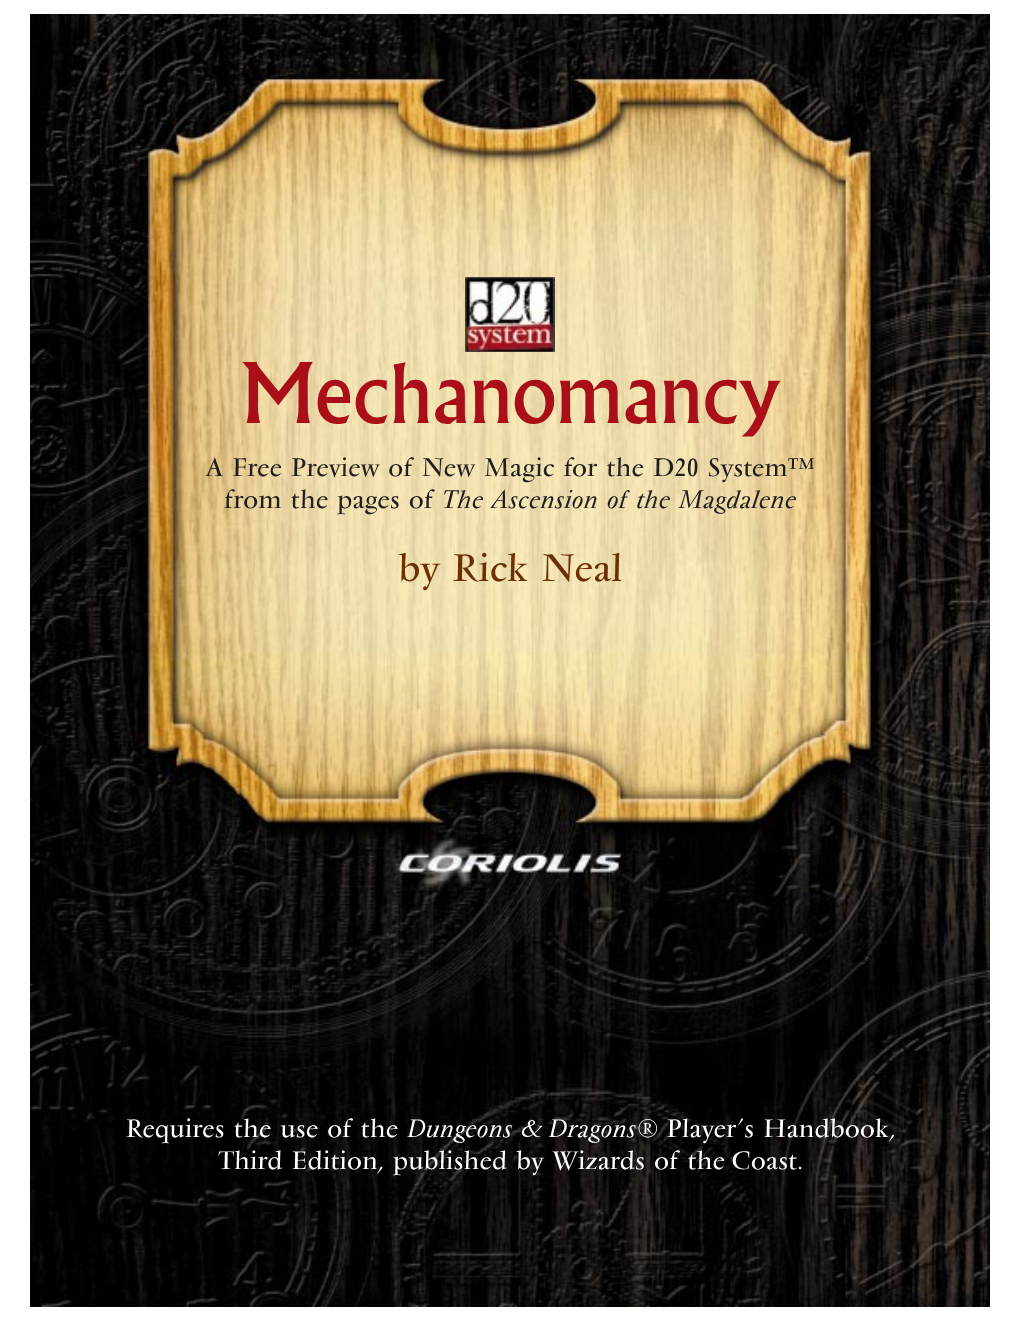 Mechanomancy a Free Preview of New Magic for the D20 System™ from the Pages of the Ascension of the Magdalene by Rick Neal